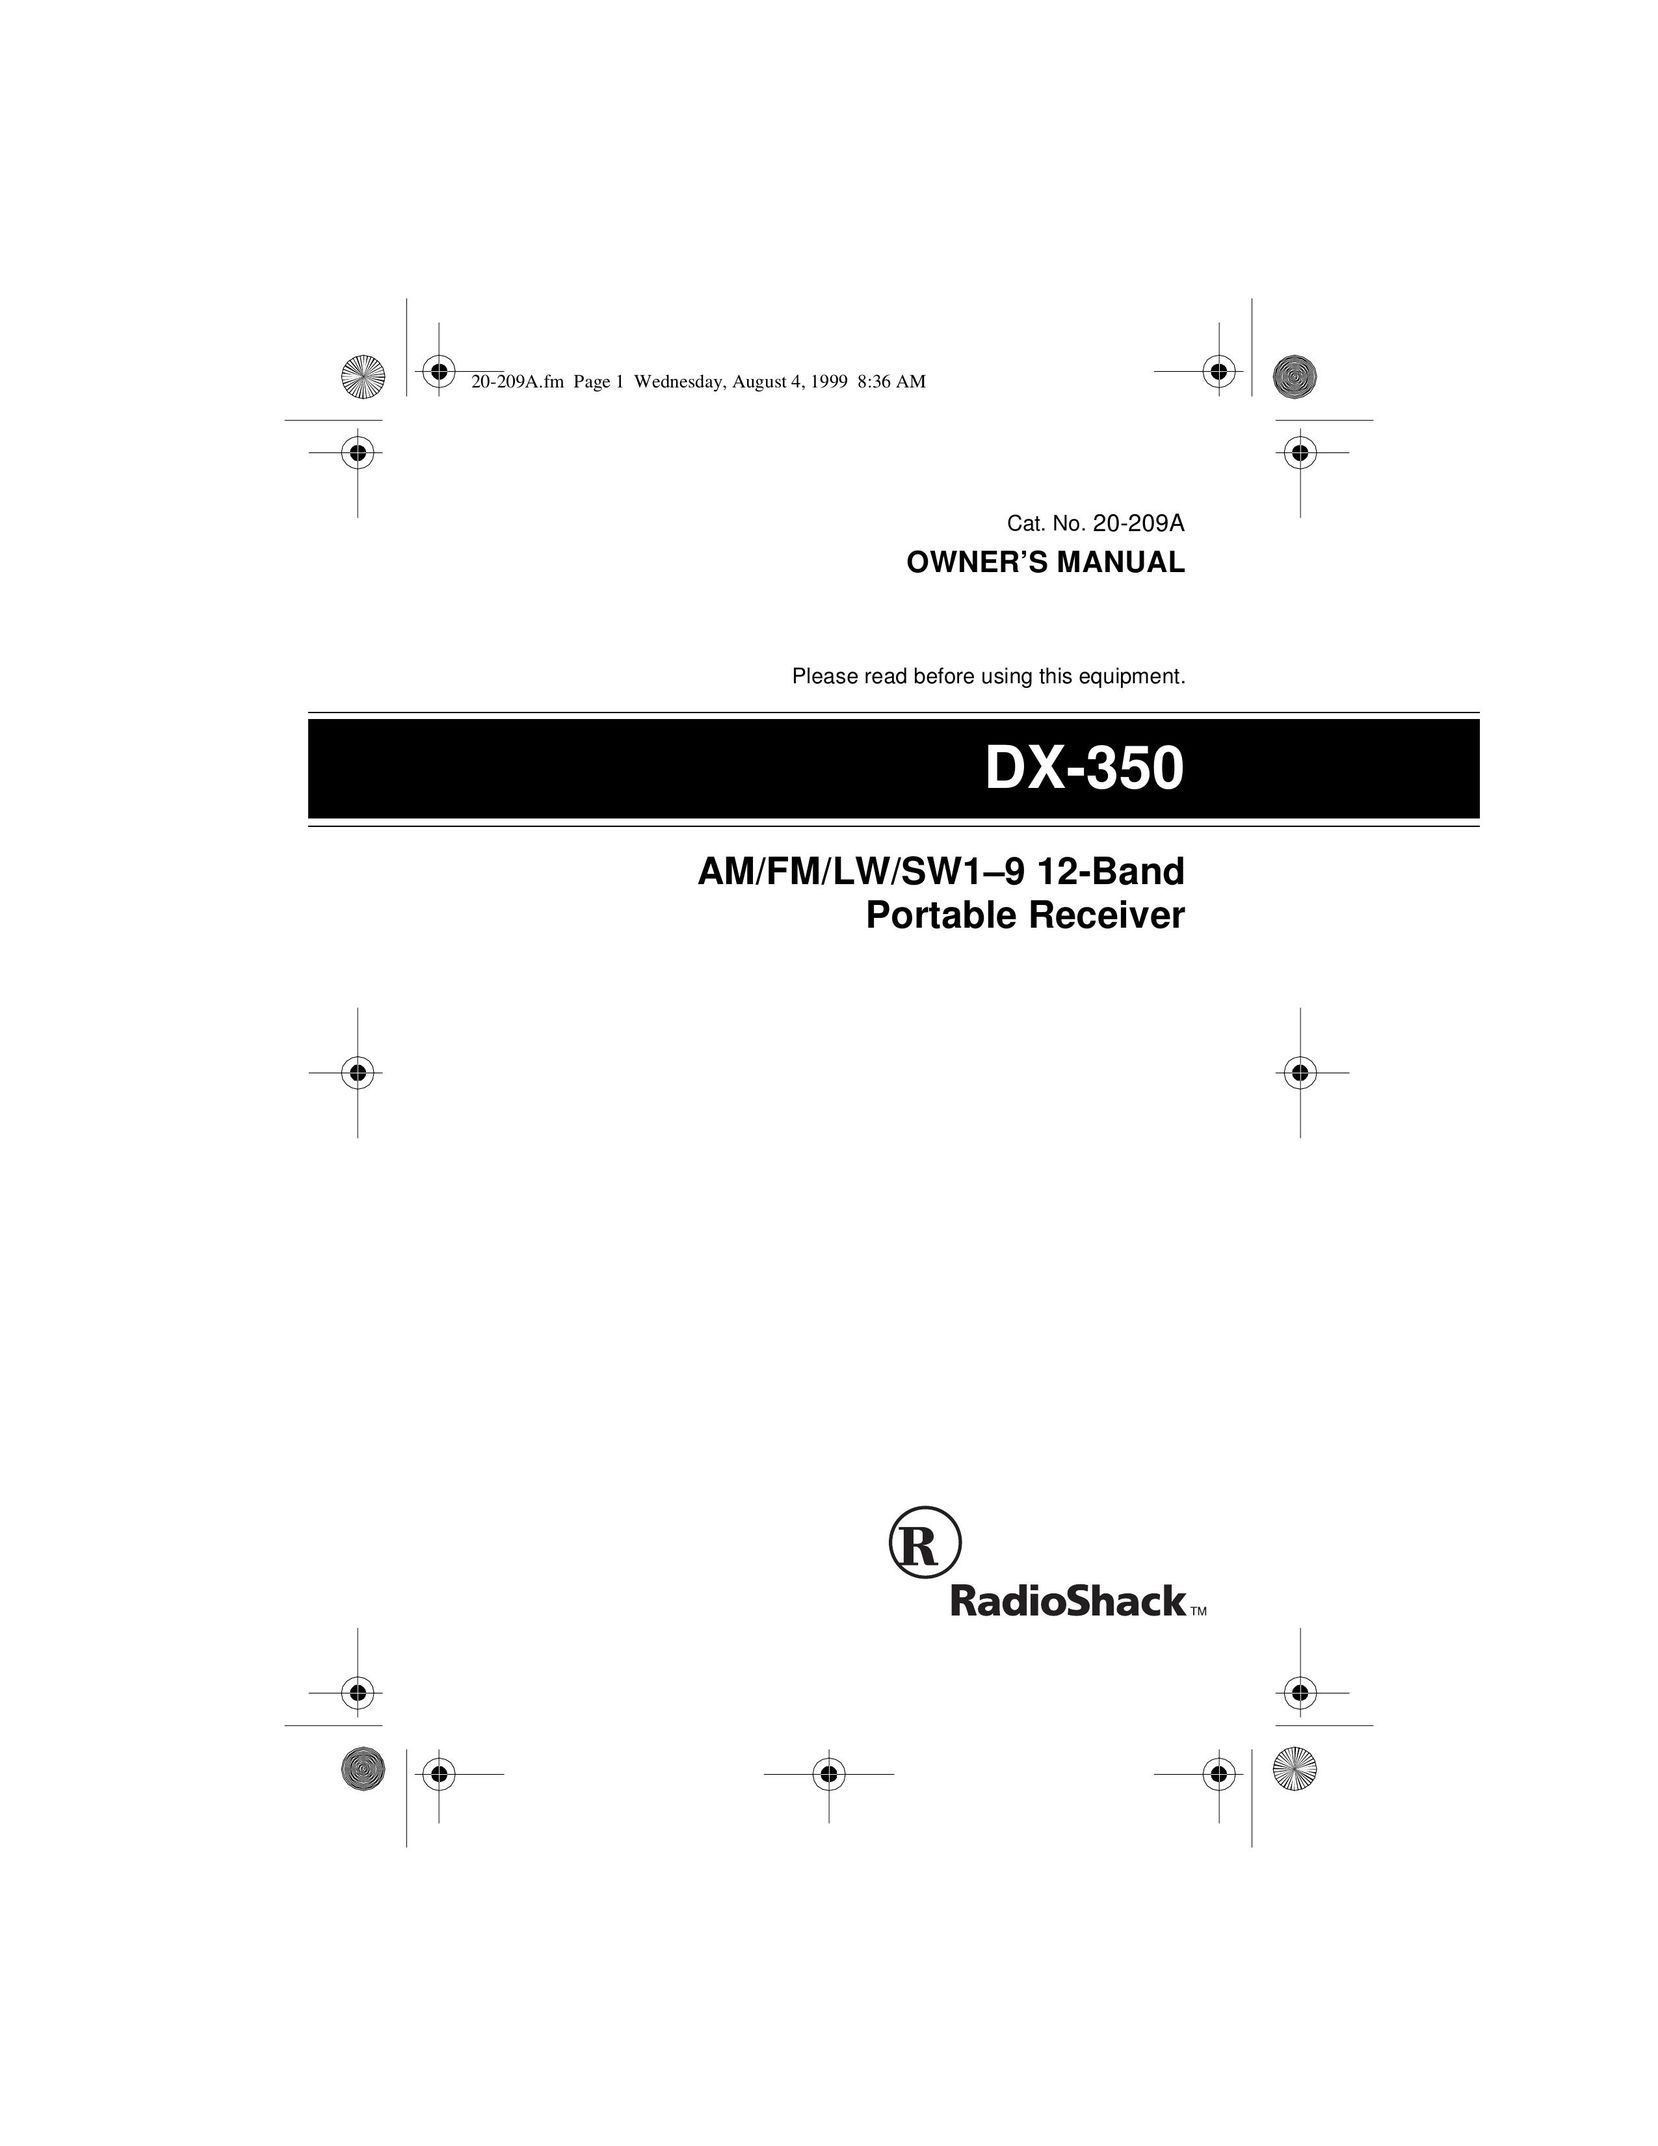 Radio Shack DX-350 Stereo Receiver User Manual